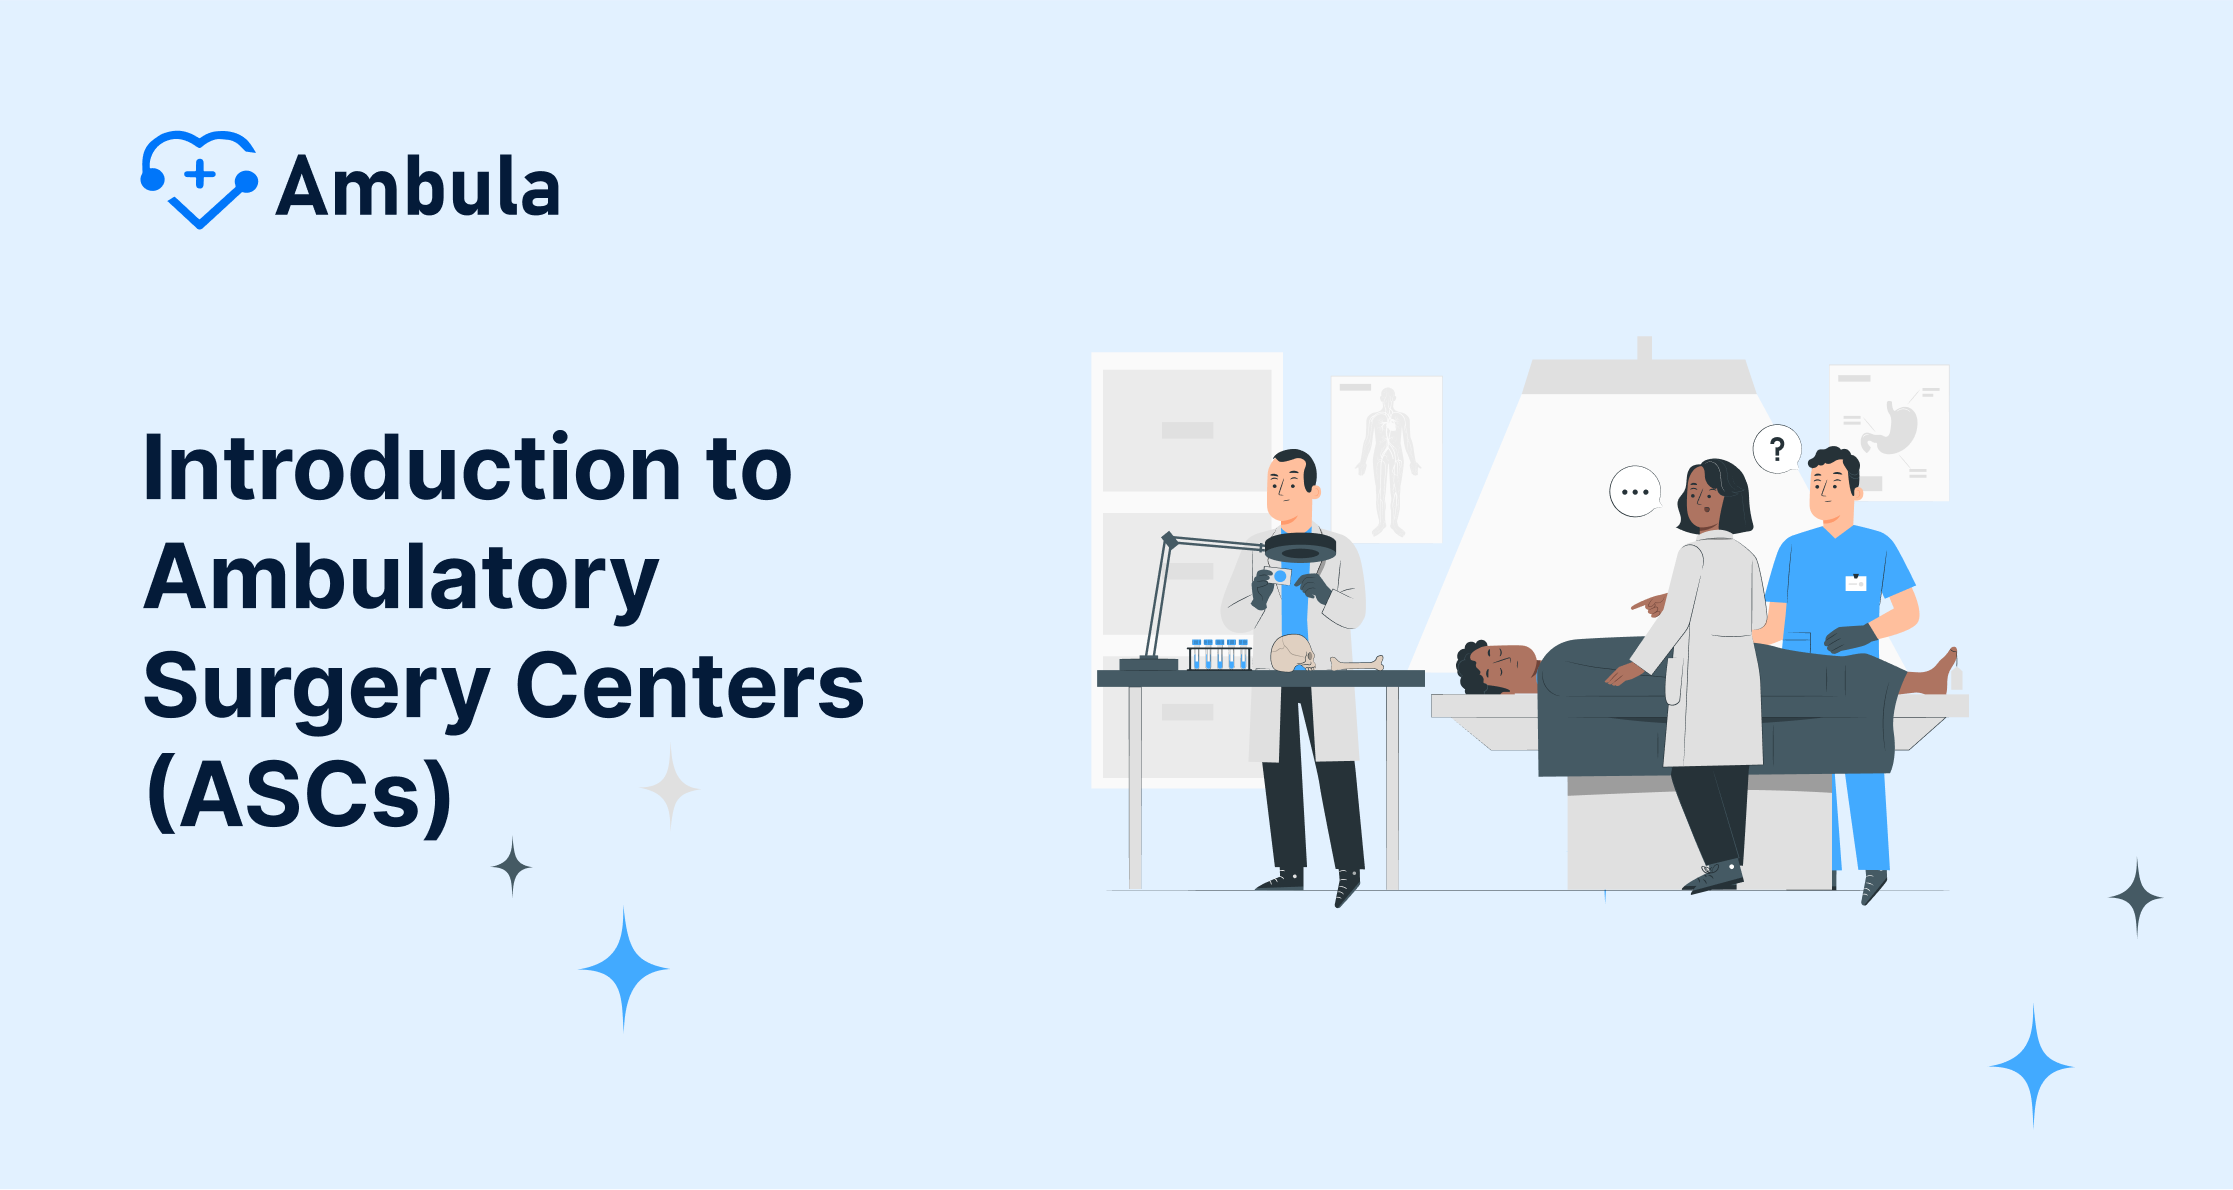 Introduction to Ambulatory Surgery Centers (ASCs)